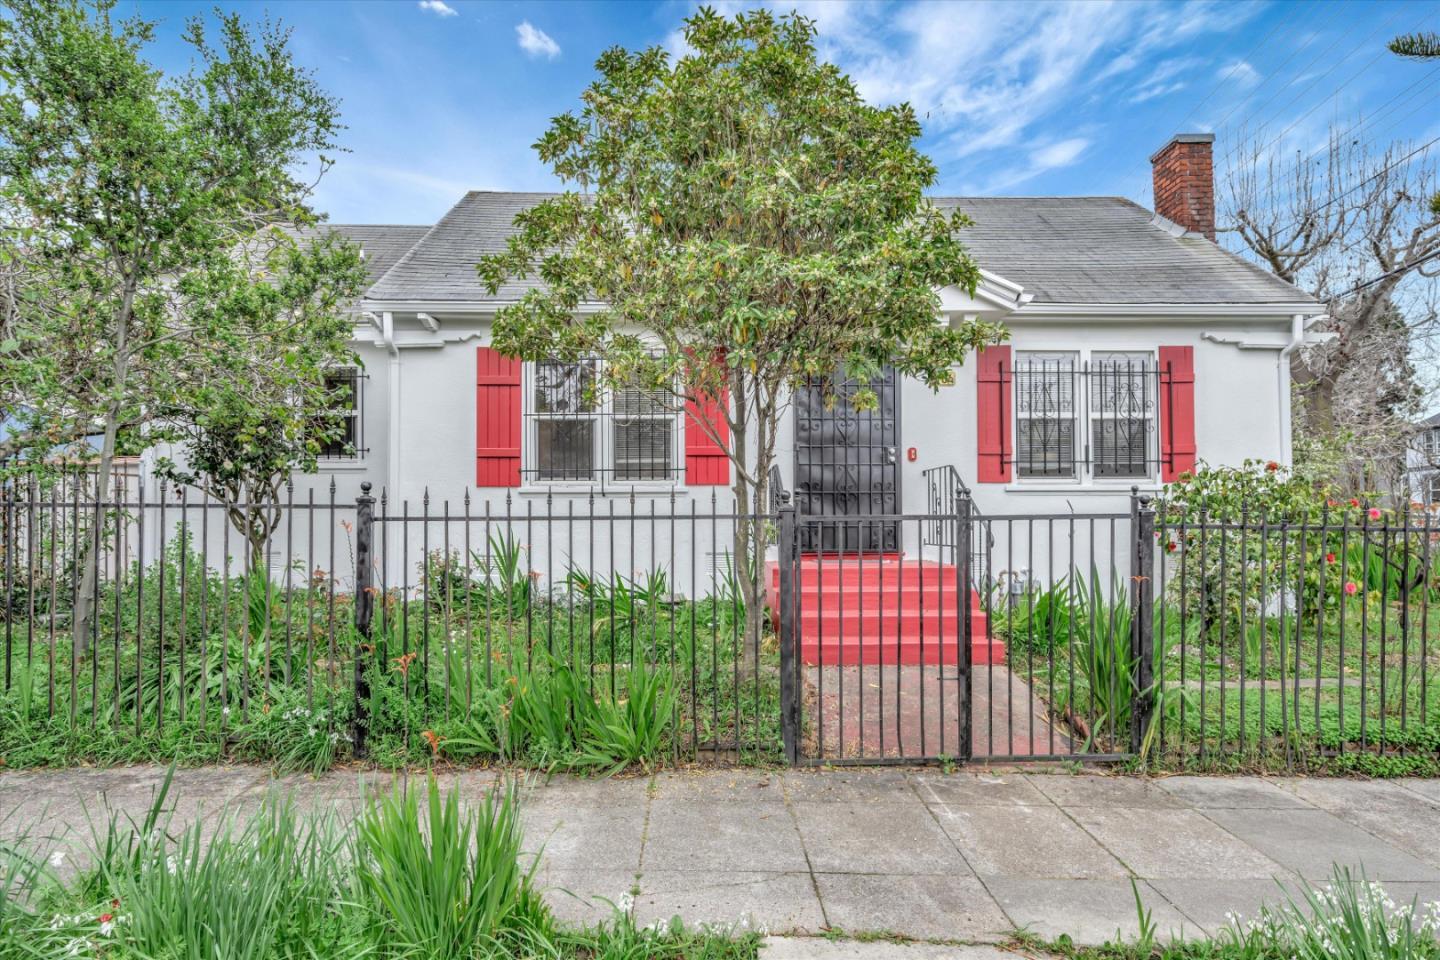 1904 Blake ST, BERKELEY, Single Family Home,  for sale, Philip Roza, Realty World - Dominion